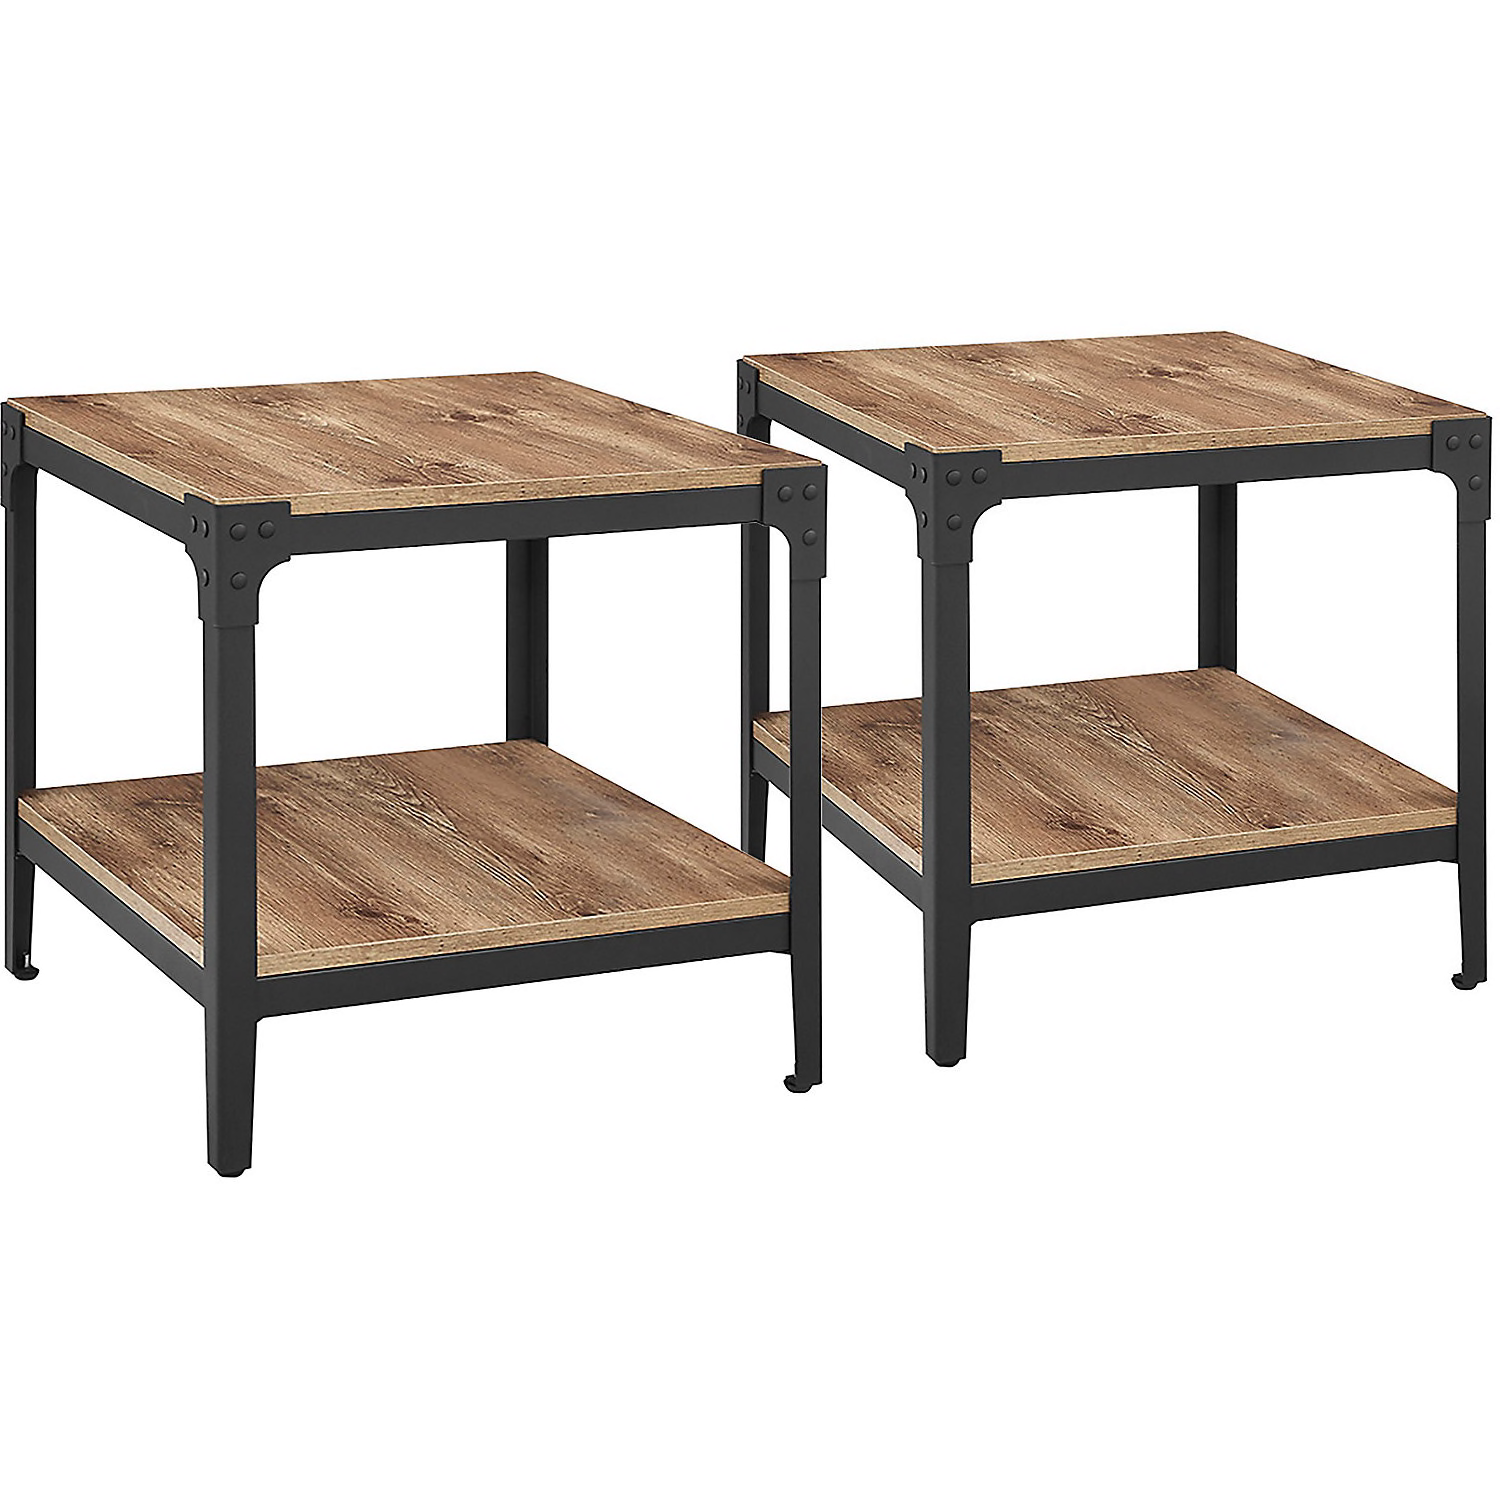 barnwood end tables set brown accent table and occasional furniture desk entry decor ideas black coffee with drawers office patio las vegas white gold nightstand leick mission